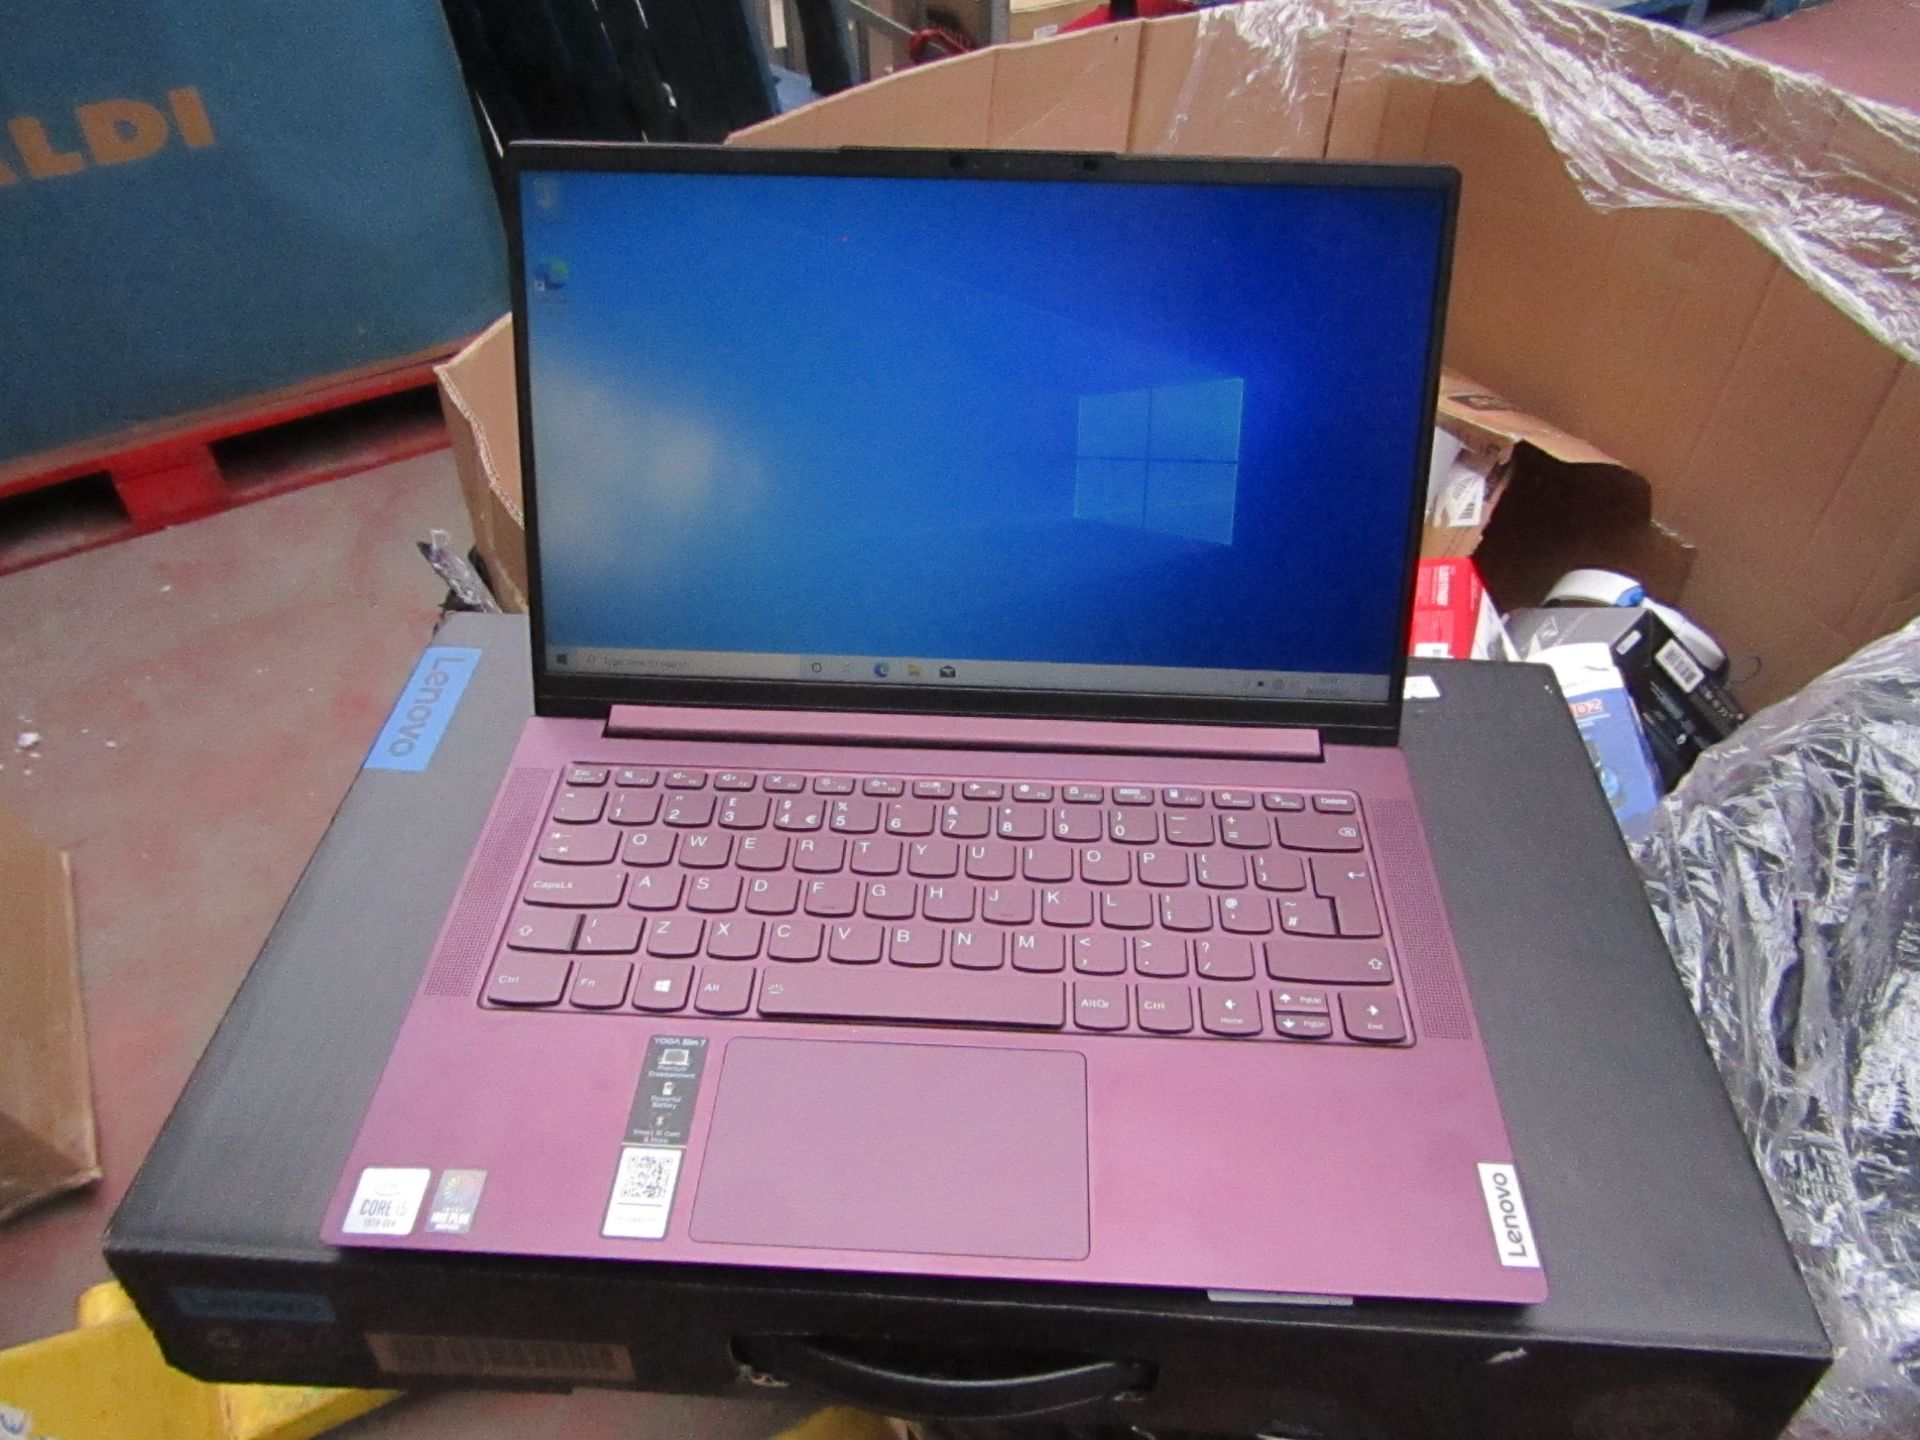 LENOVO Yoga Slim 7 14" Laptop - Intel® Core™ i5, 256GB SSD, tested working and boxed with charger.